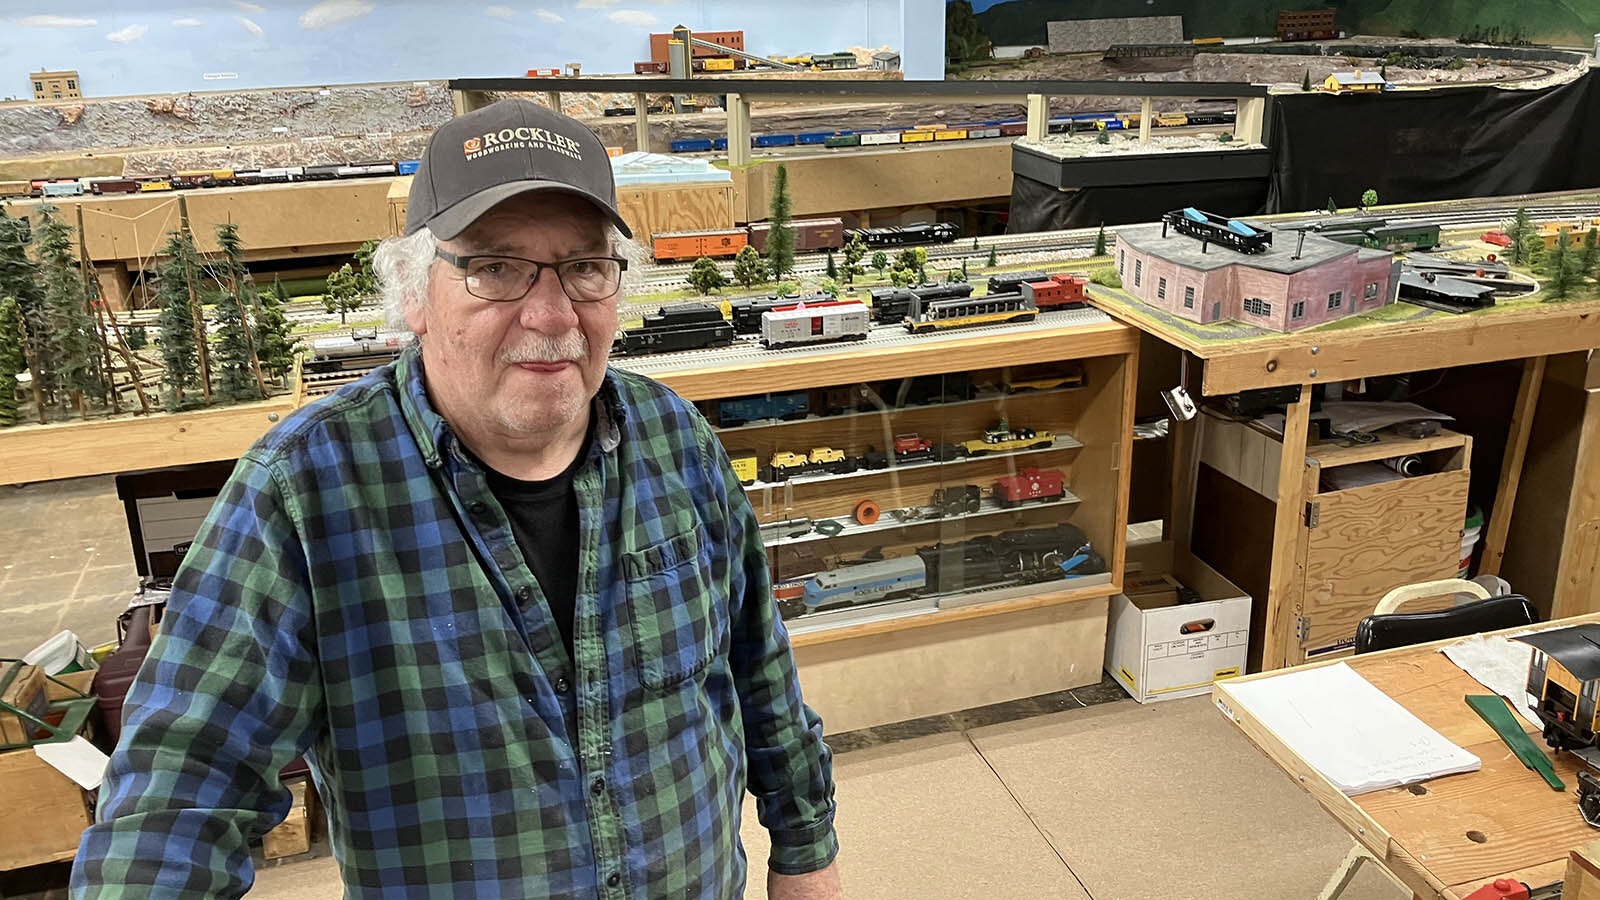 Central Wyoming Model Railroad Association Treasurer Harry Buhler said the club offers a lot of opportunities for creativity involving layouts, construction, wiring, or just running trains along the club house’s many layouts.